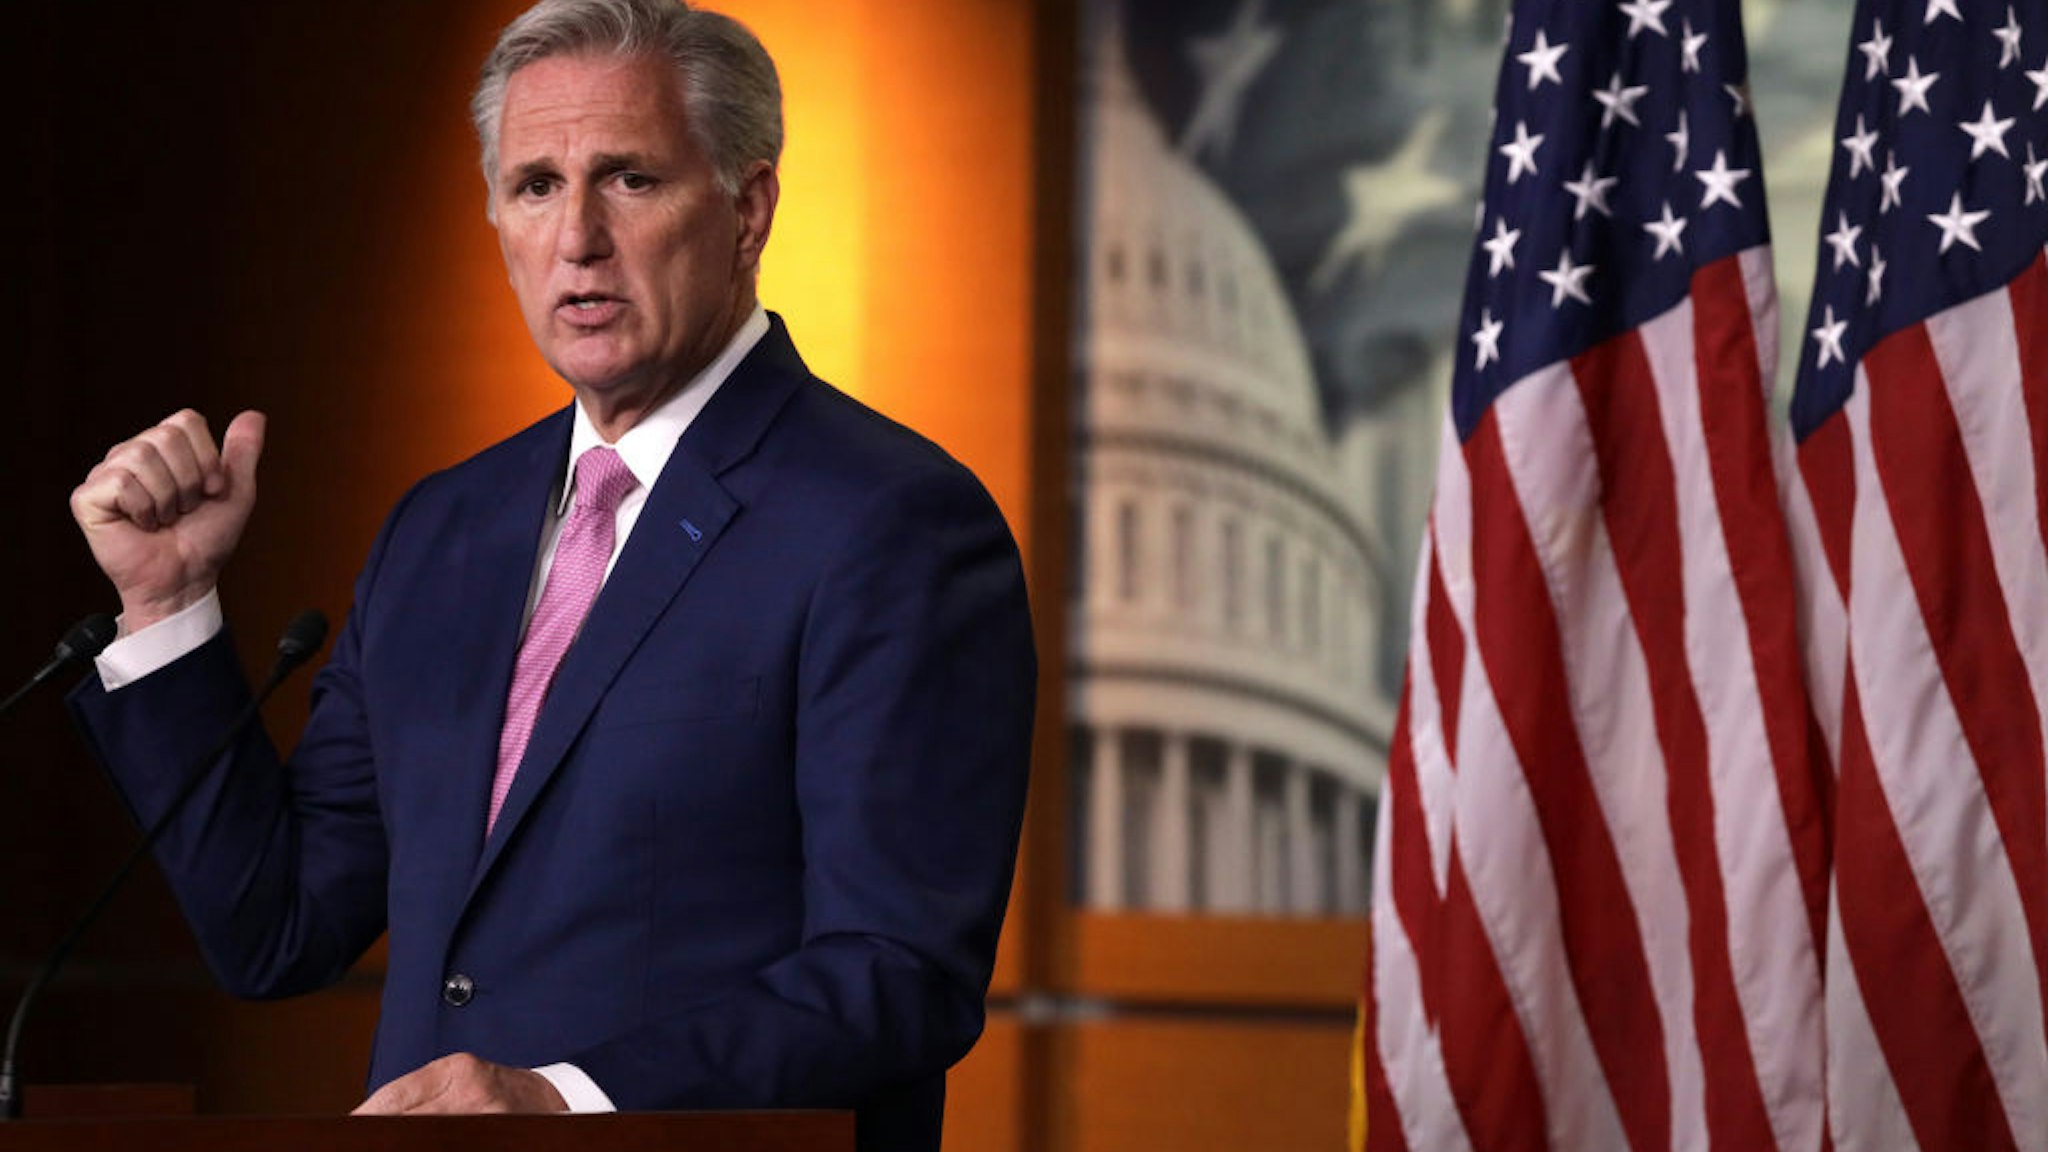 WASHINGTON, DC - MAY 28: U.S. House Minority Leader Rep. Kevin McCarthy (R-CA) speaks during a weekly news conference May 28, 2020 on Capitol Hill in Washington, DC. McCarthy held news conference to fill questions from members of the press. (Photo by Alex Wong/Getty Images)